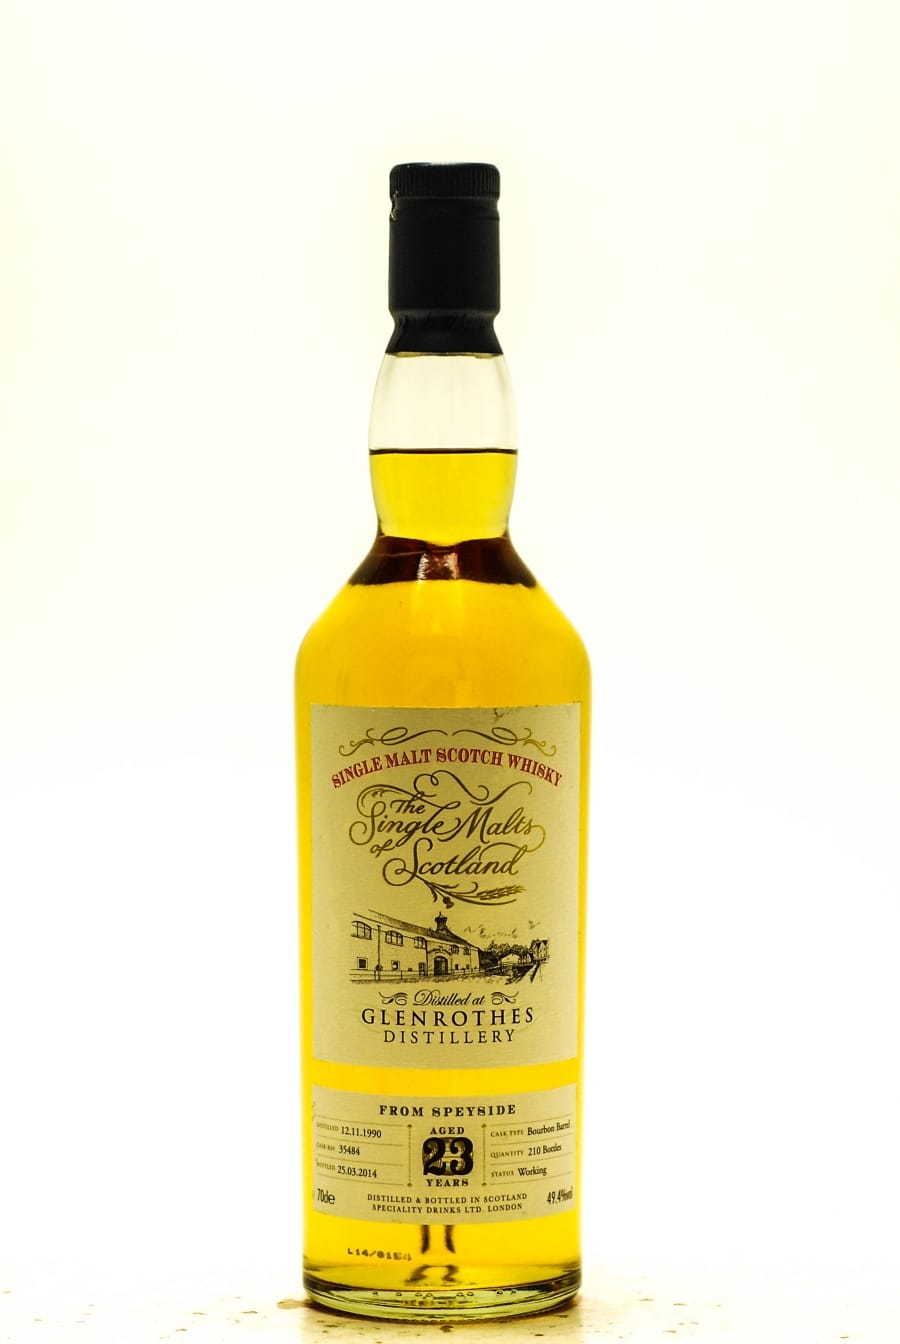 Glenrothes - Glenrothes 23 Years Old The Single Malts of Scotland Distilled: 12.11.1990 Botteld 25.03.2014 Cask: 35484  1 of 210 bottels 49.4% 1990 Perfect